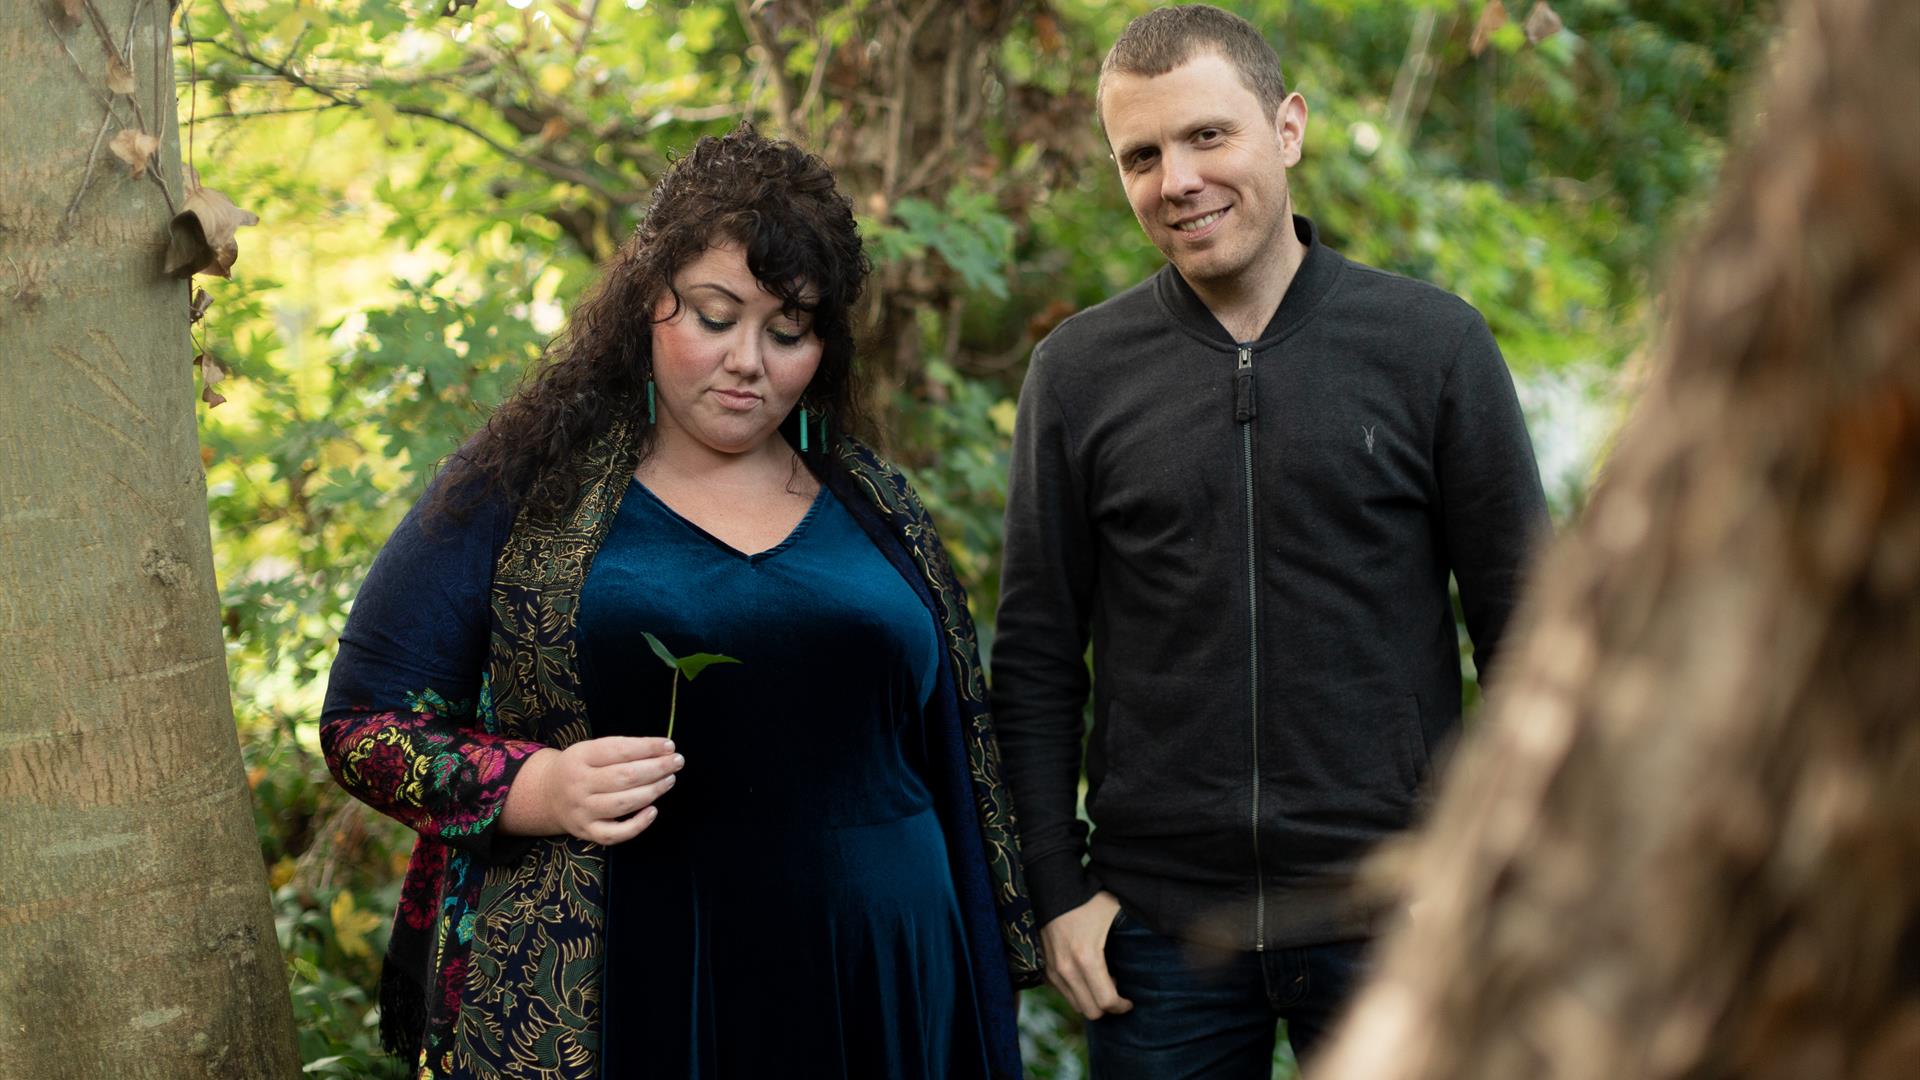 image of Ríoghnach Connolly and Stuart McCallum  outdoors in a forest.